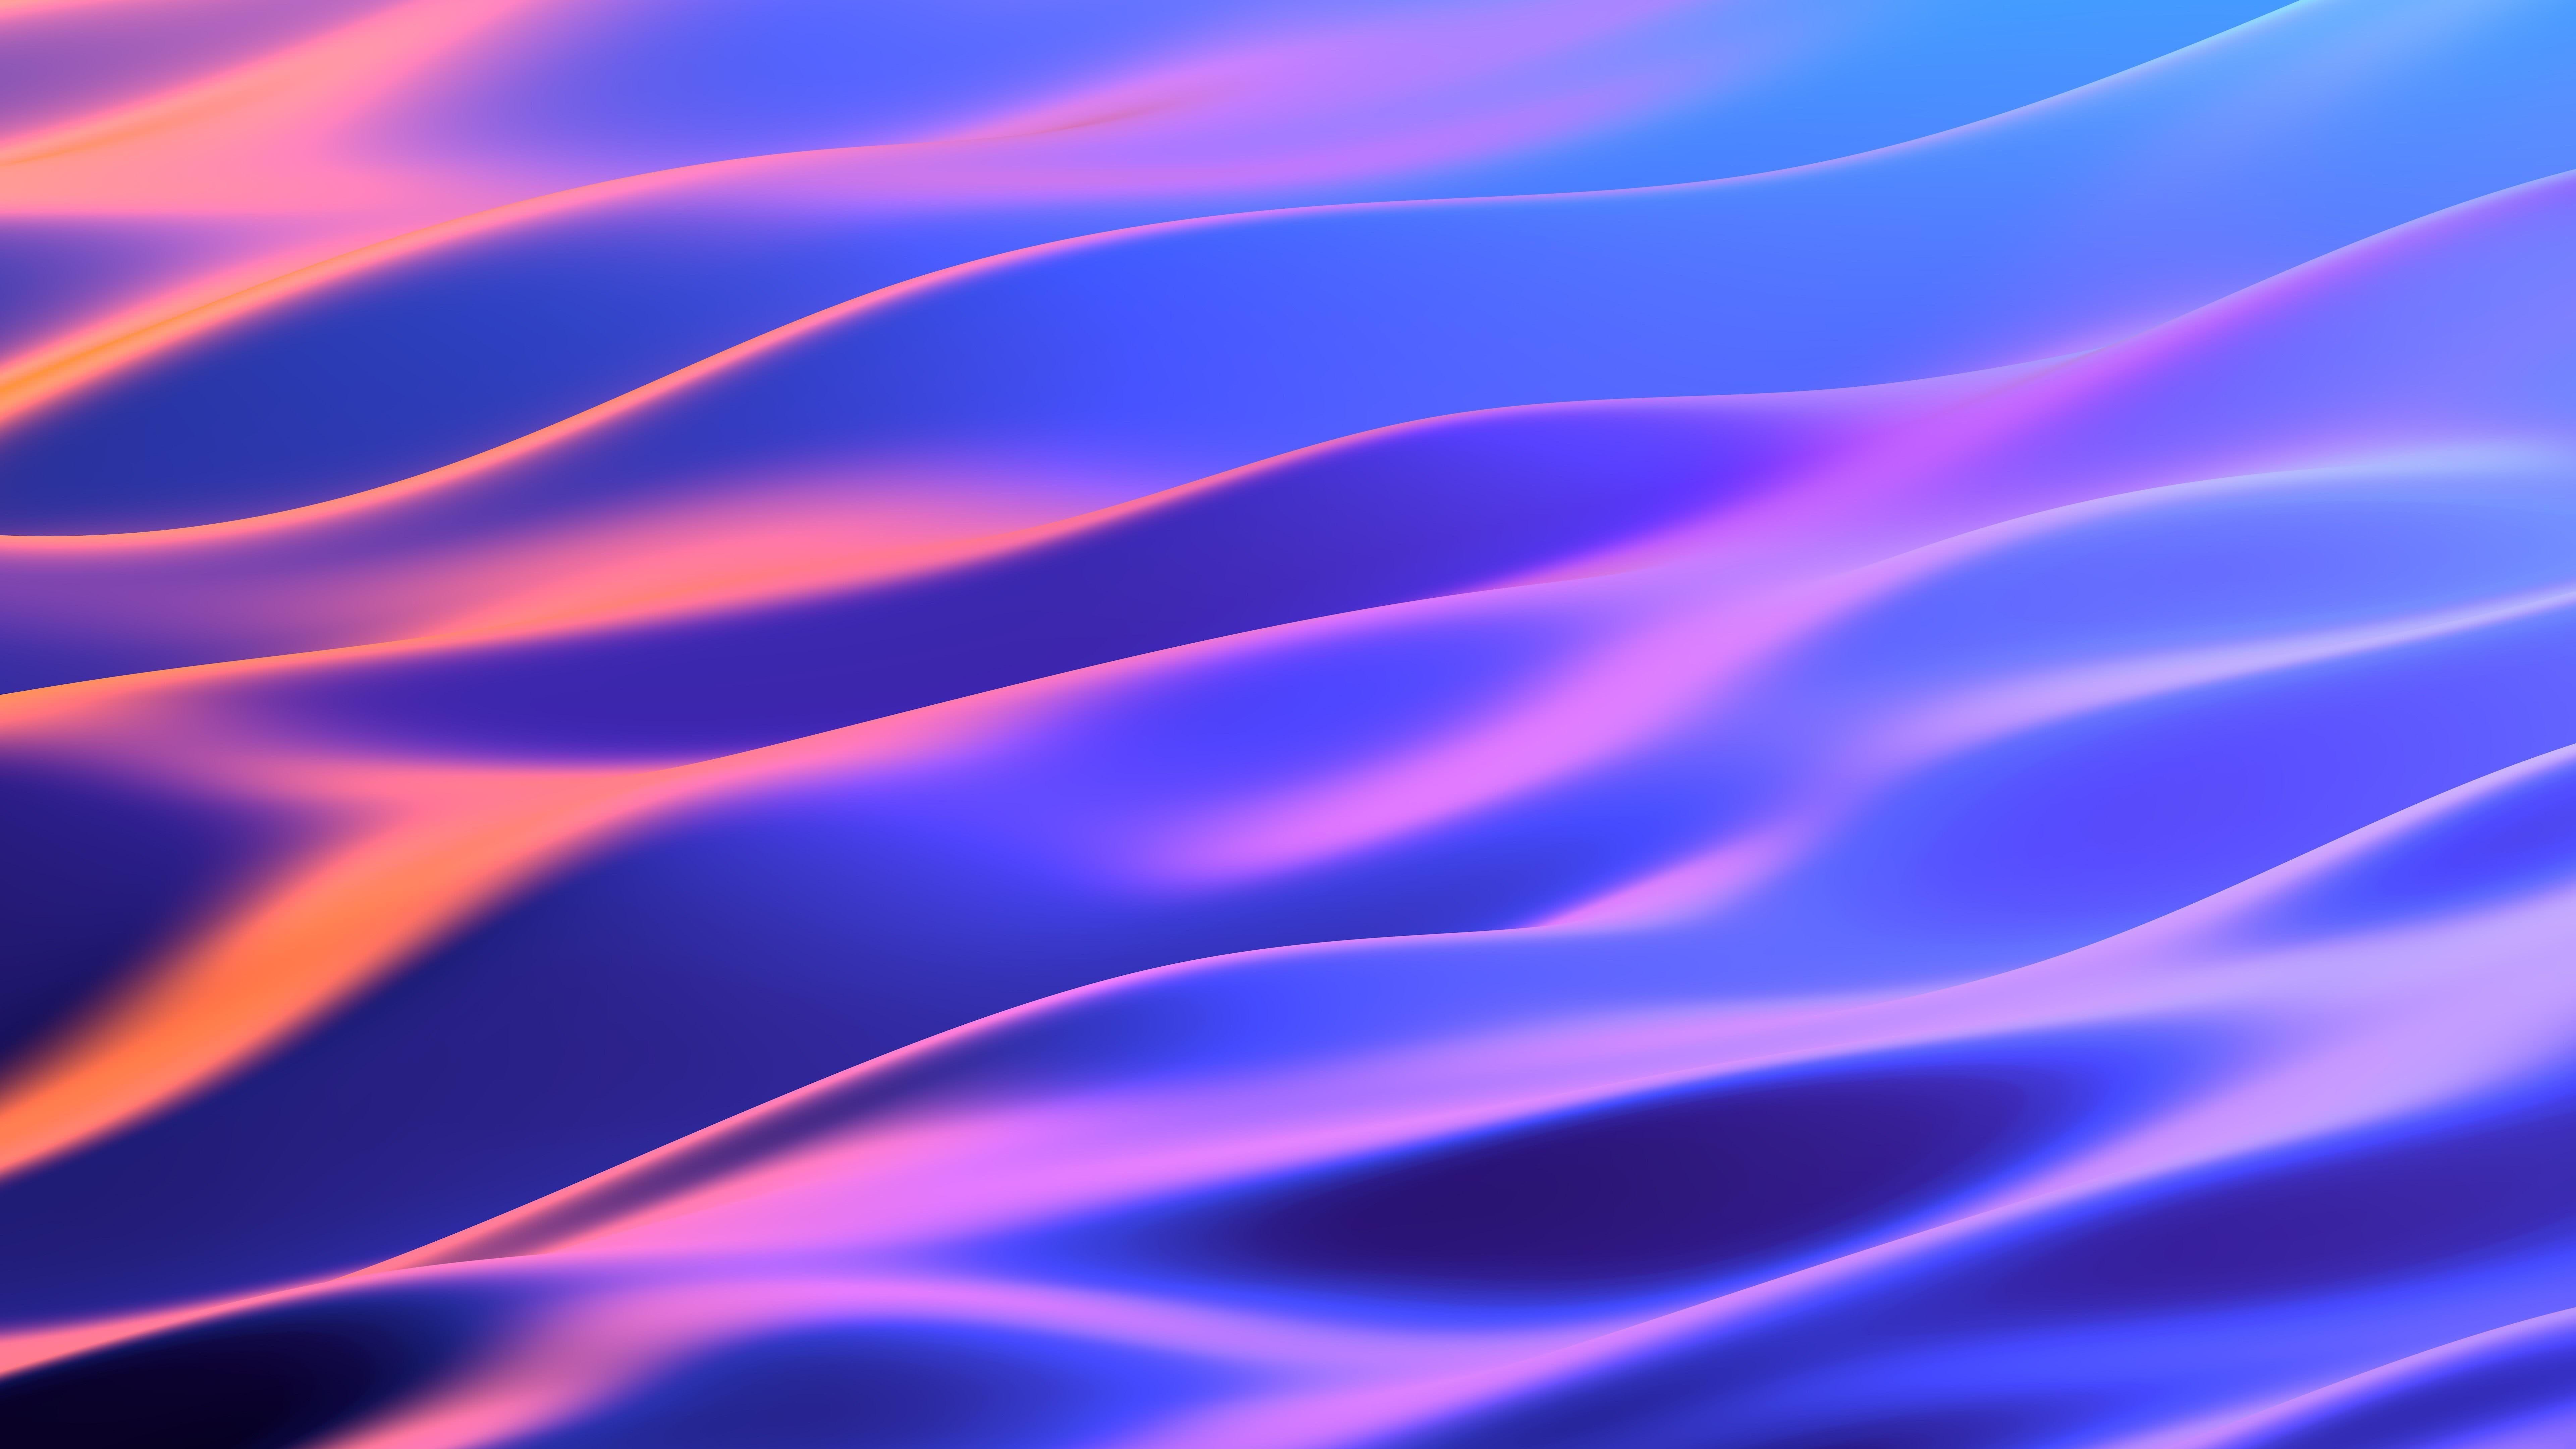 7680x4320 Colorful Wave Lines 8k Wallpaper Hd Abstract 4k Wallpapers